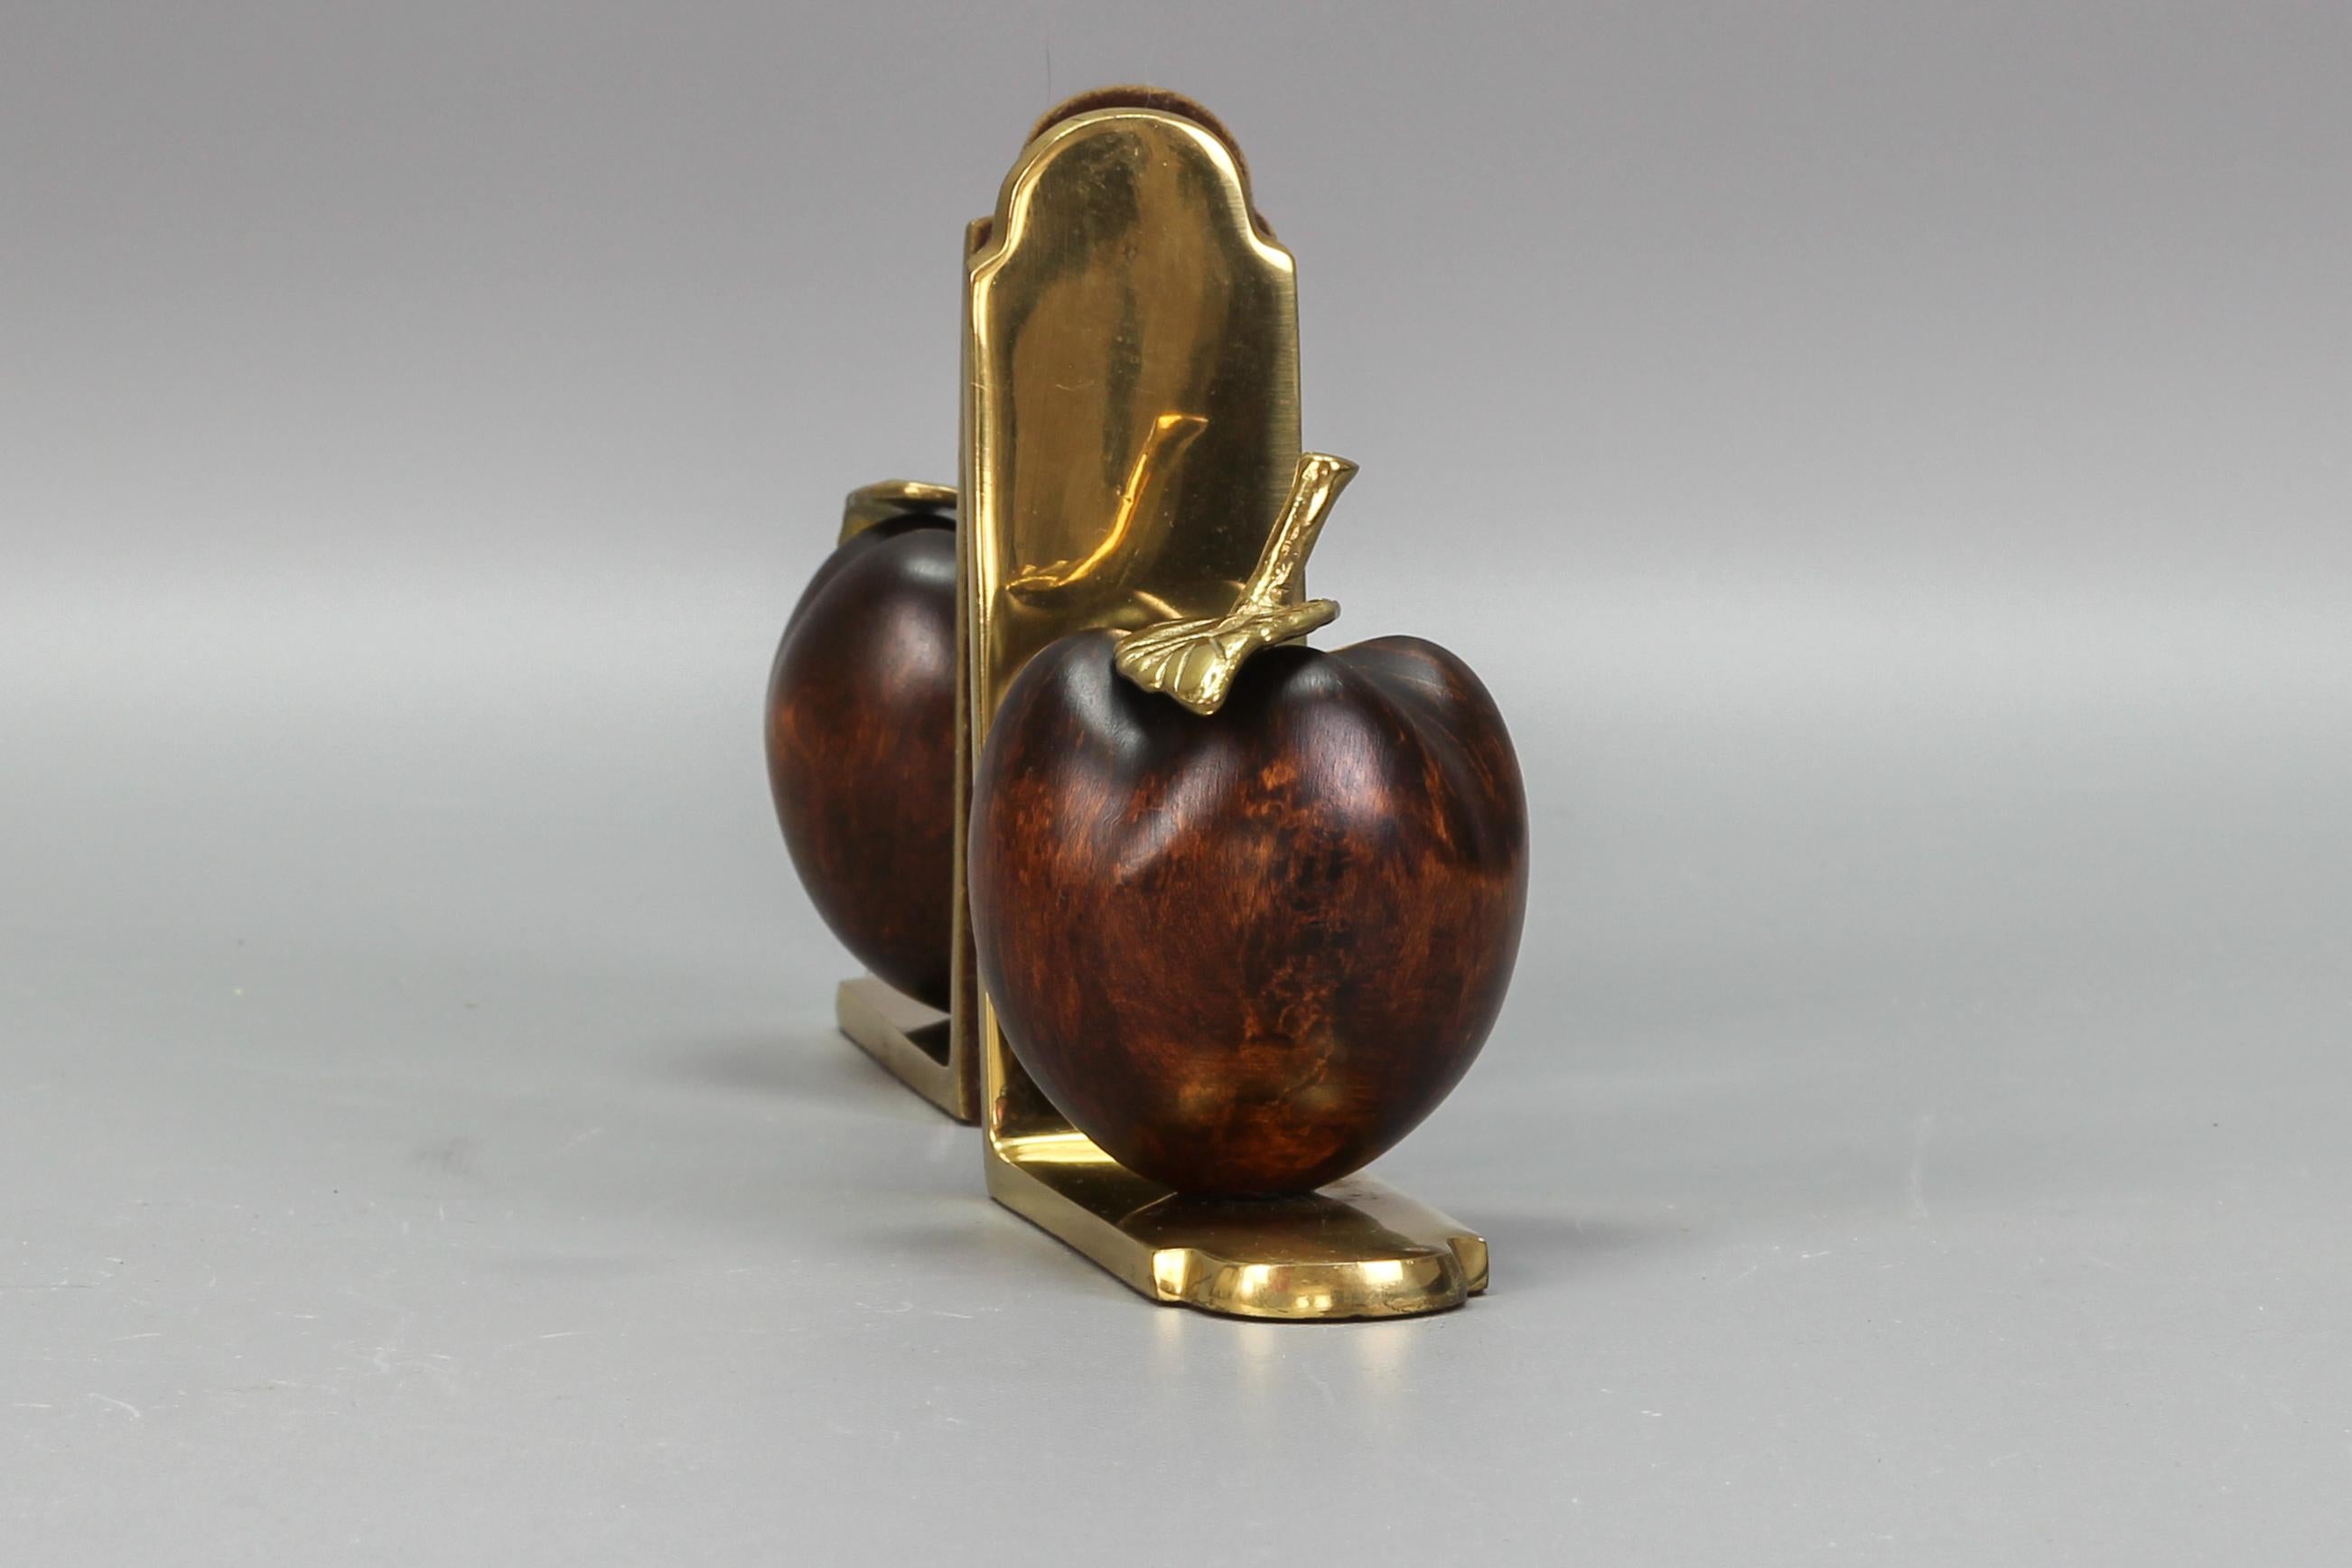 Vintage Brass and Wooden Apples Bookends In Good Condition For Sale In Barntrup, DE